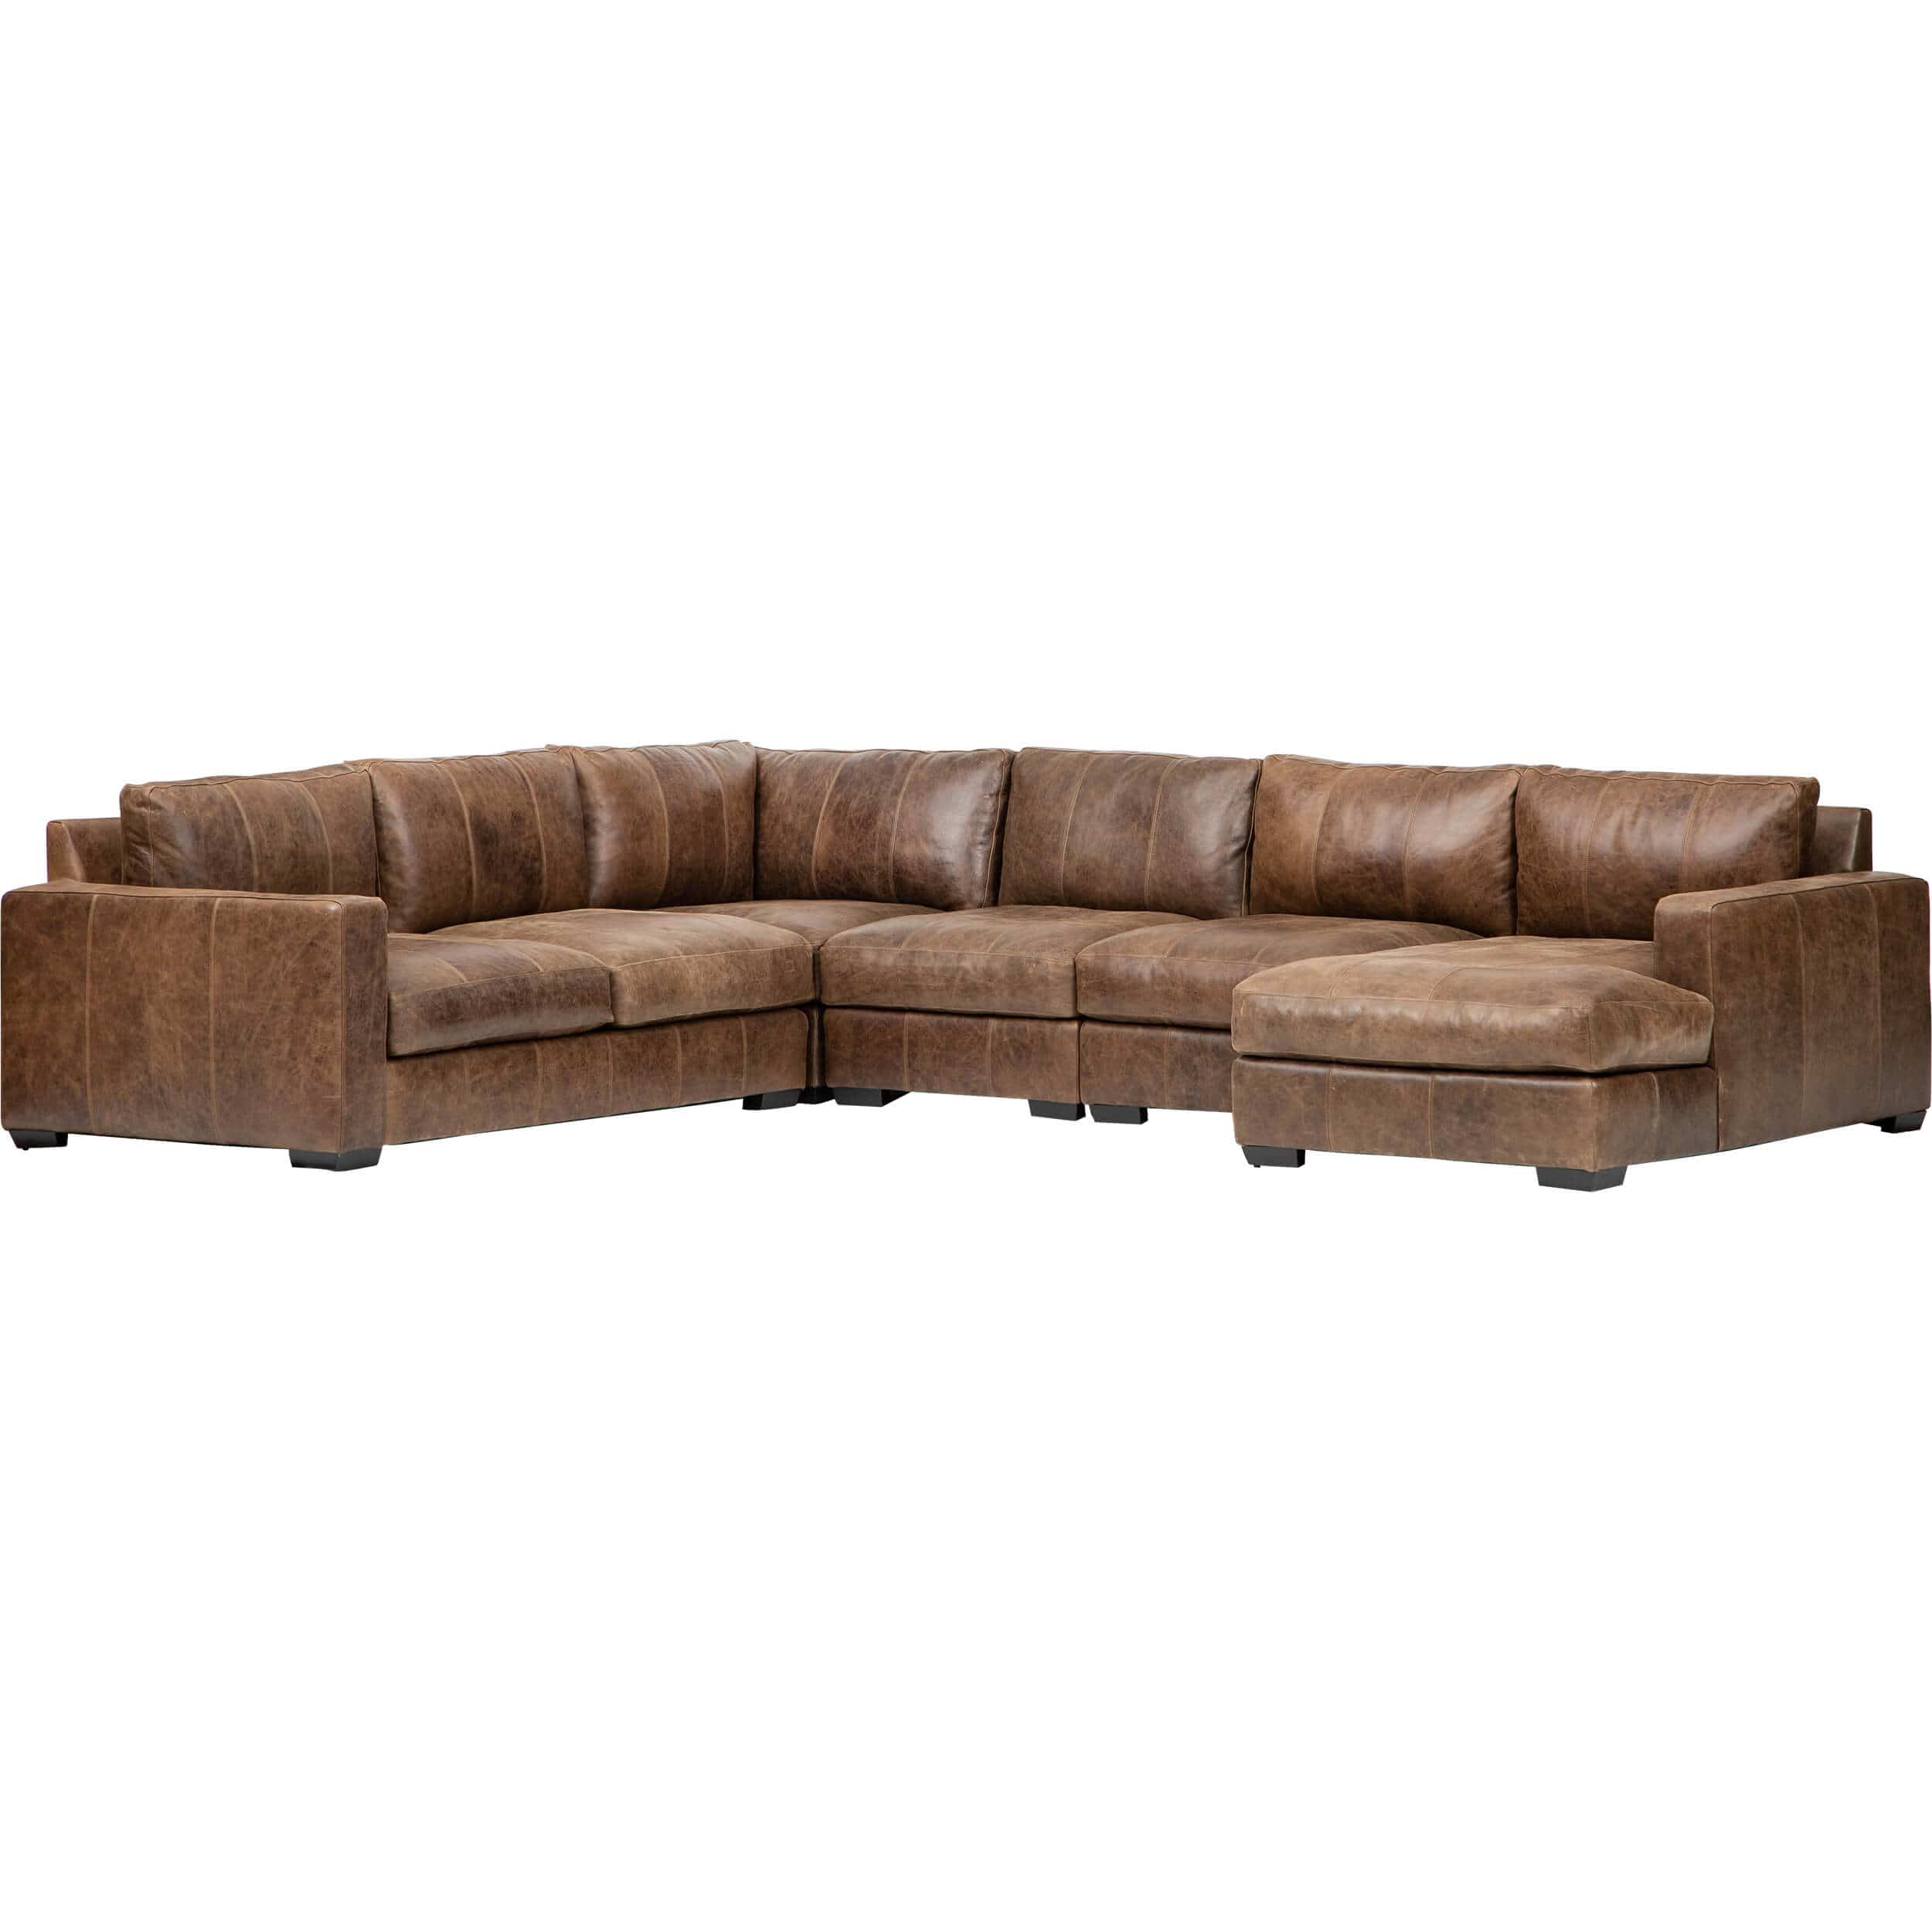 Image of Dawkins Leather Sectional